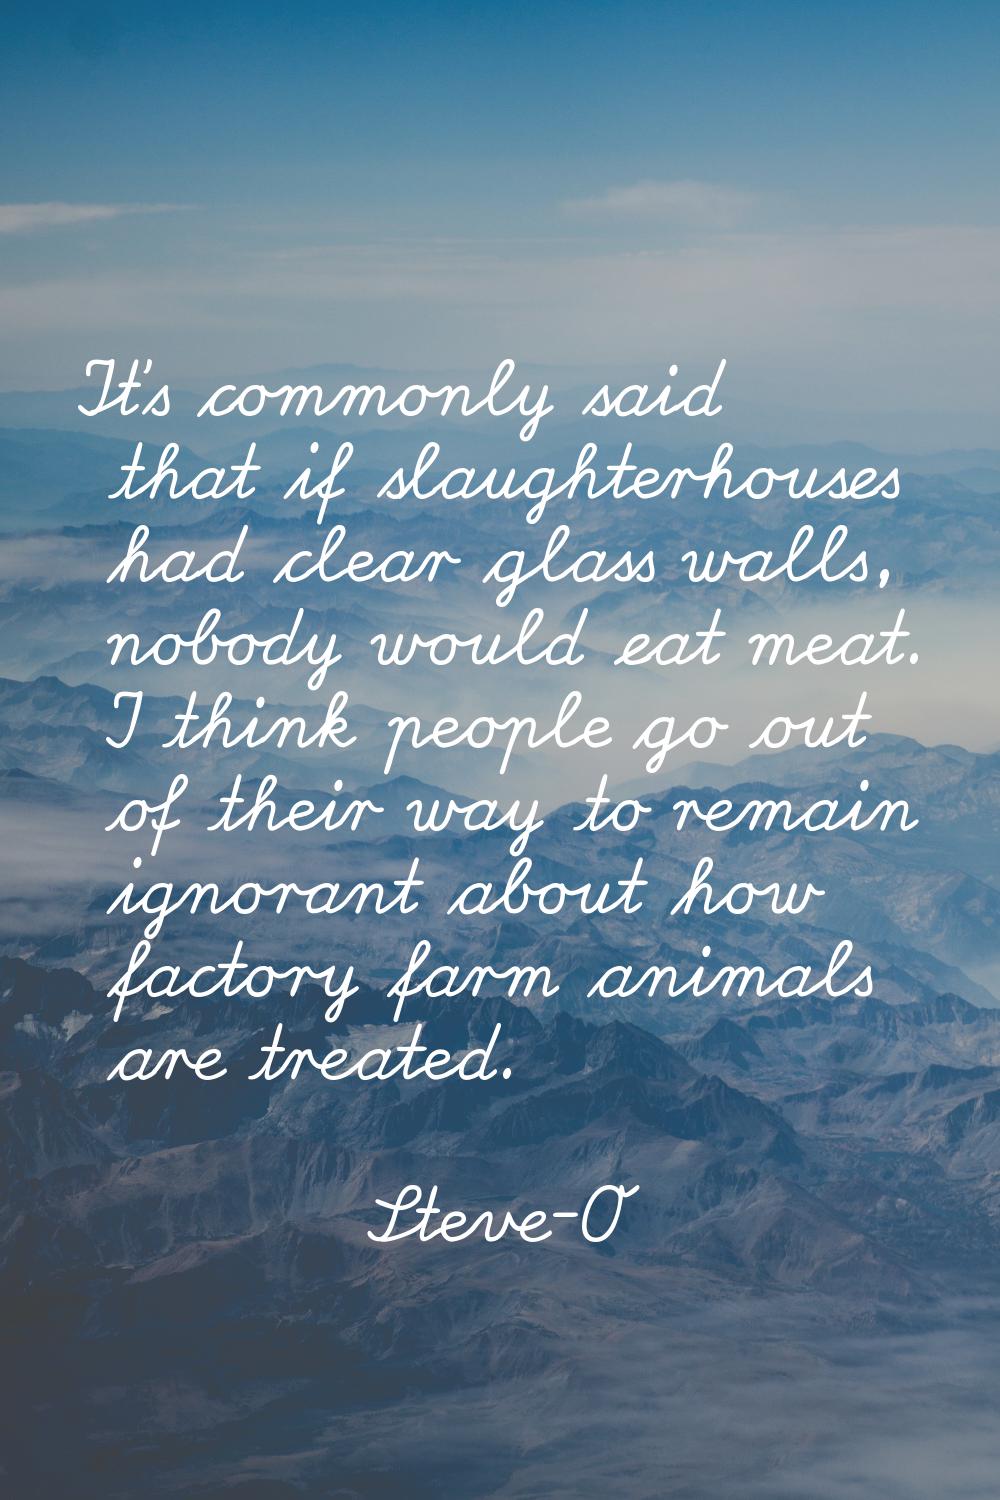 It's commonly said that if slaughterhouses had clear glass walls, nobody would eat meat. I think pe